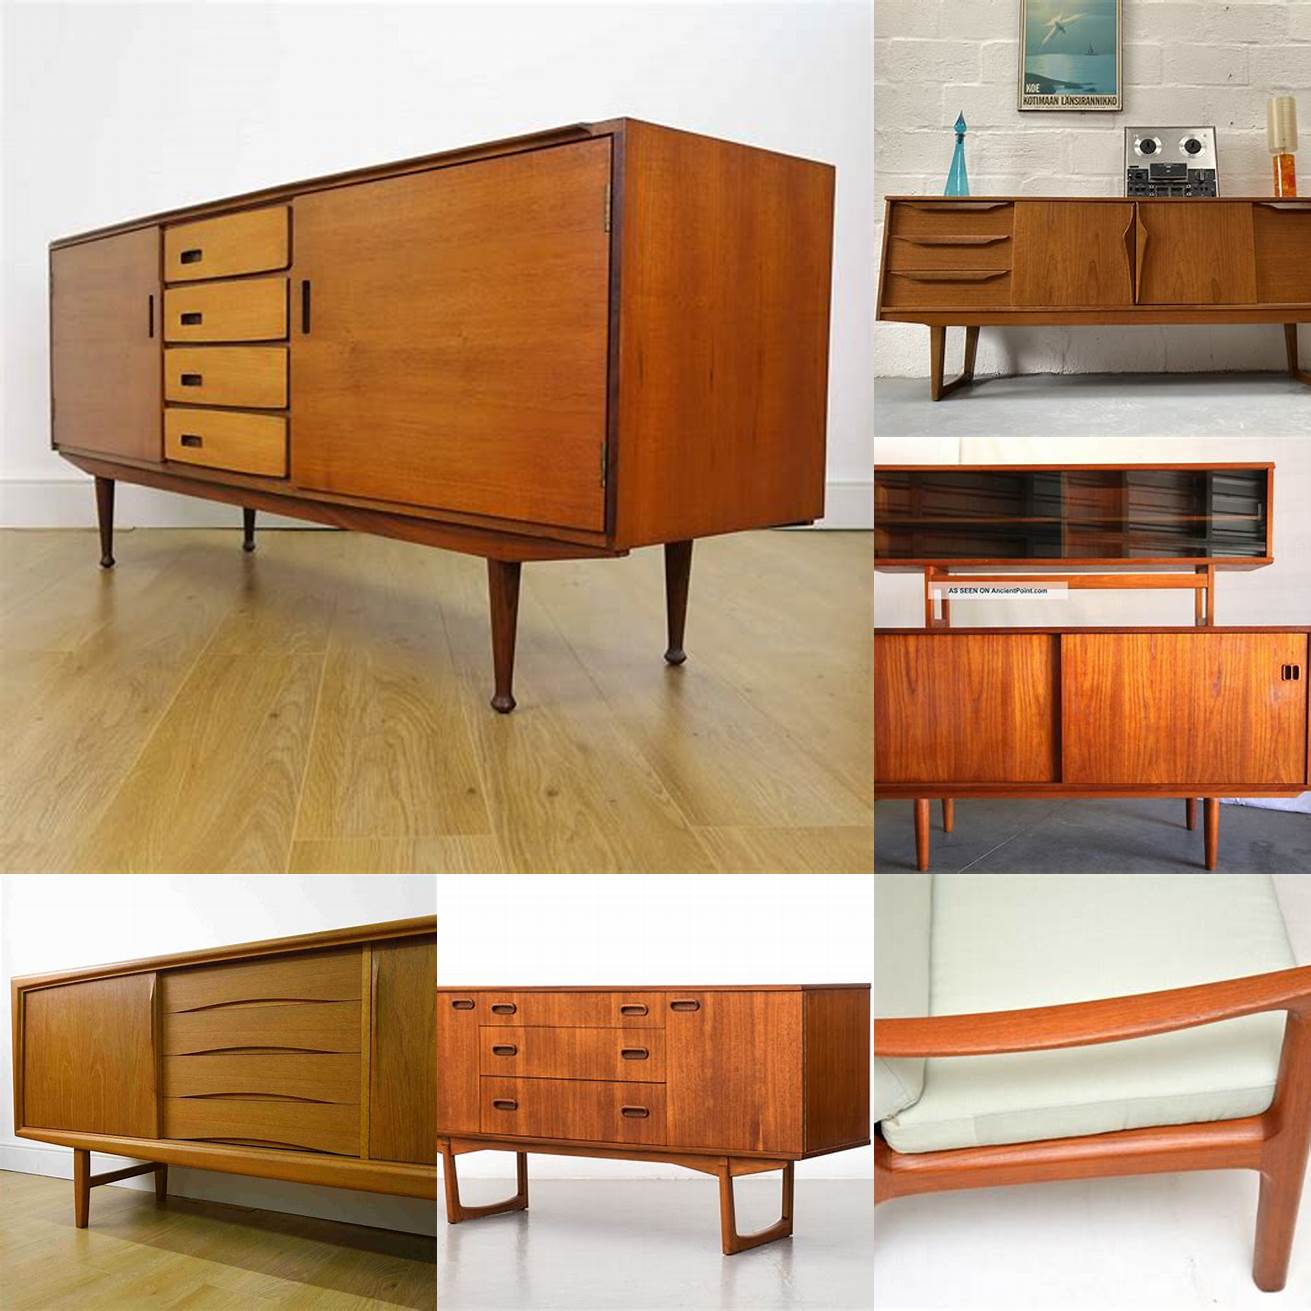 An example of a 1960s teak furniture piece